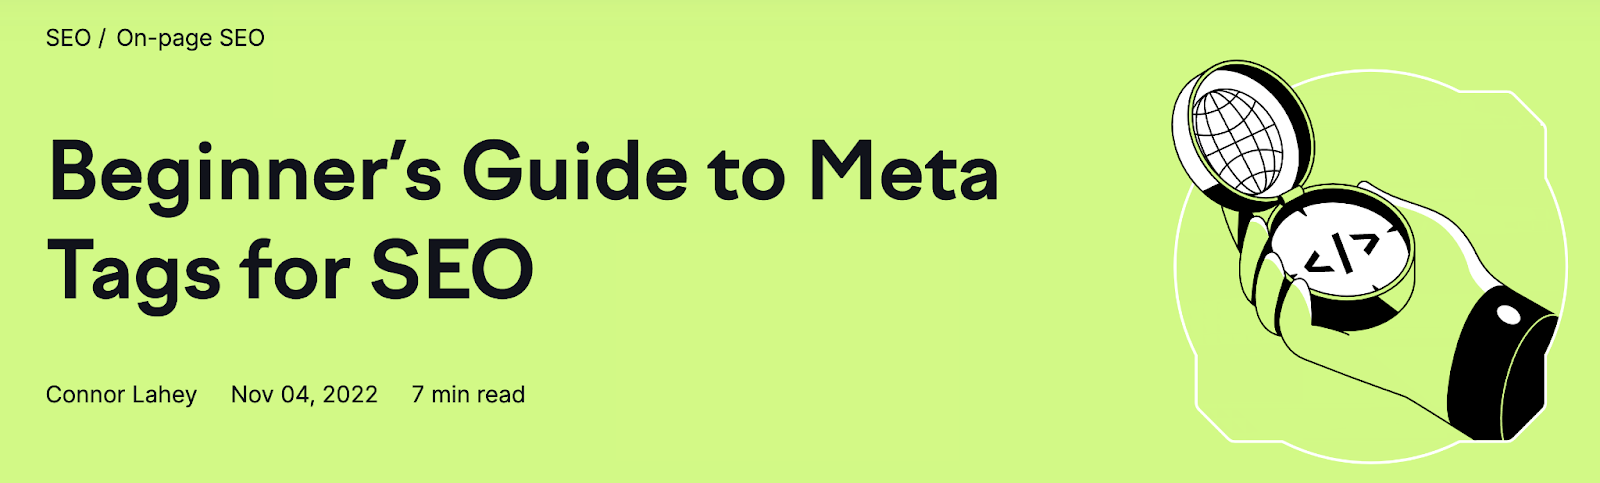 Example of a beginner-friendly title from Semrush blog "Beginner’s Guide to Meta Tags for SEO"